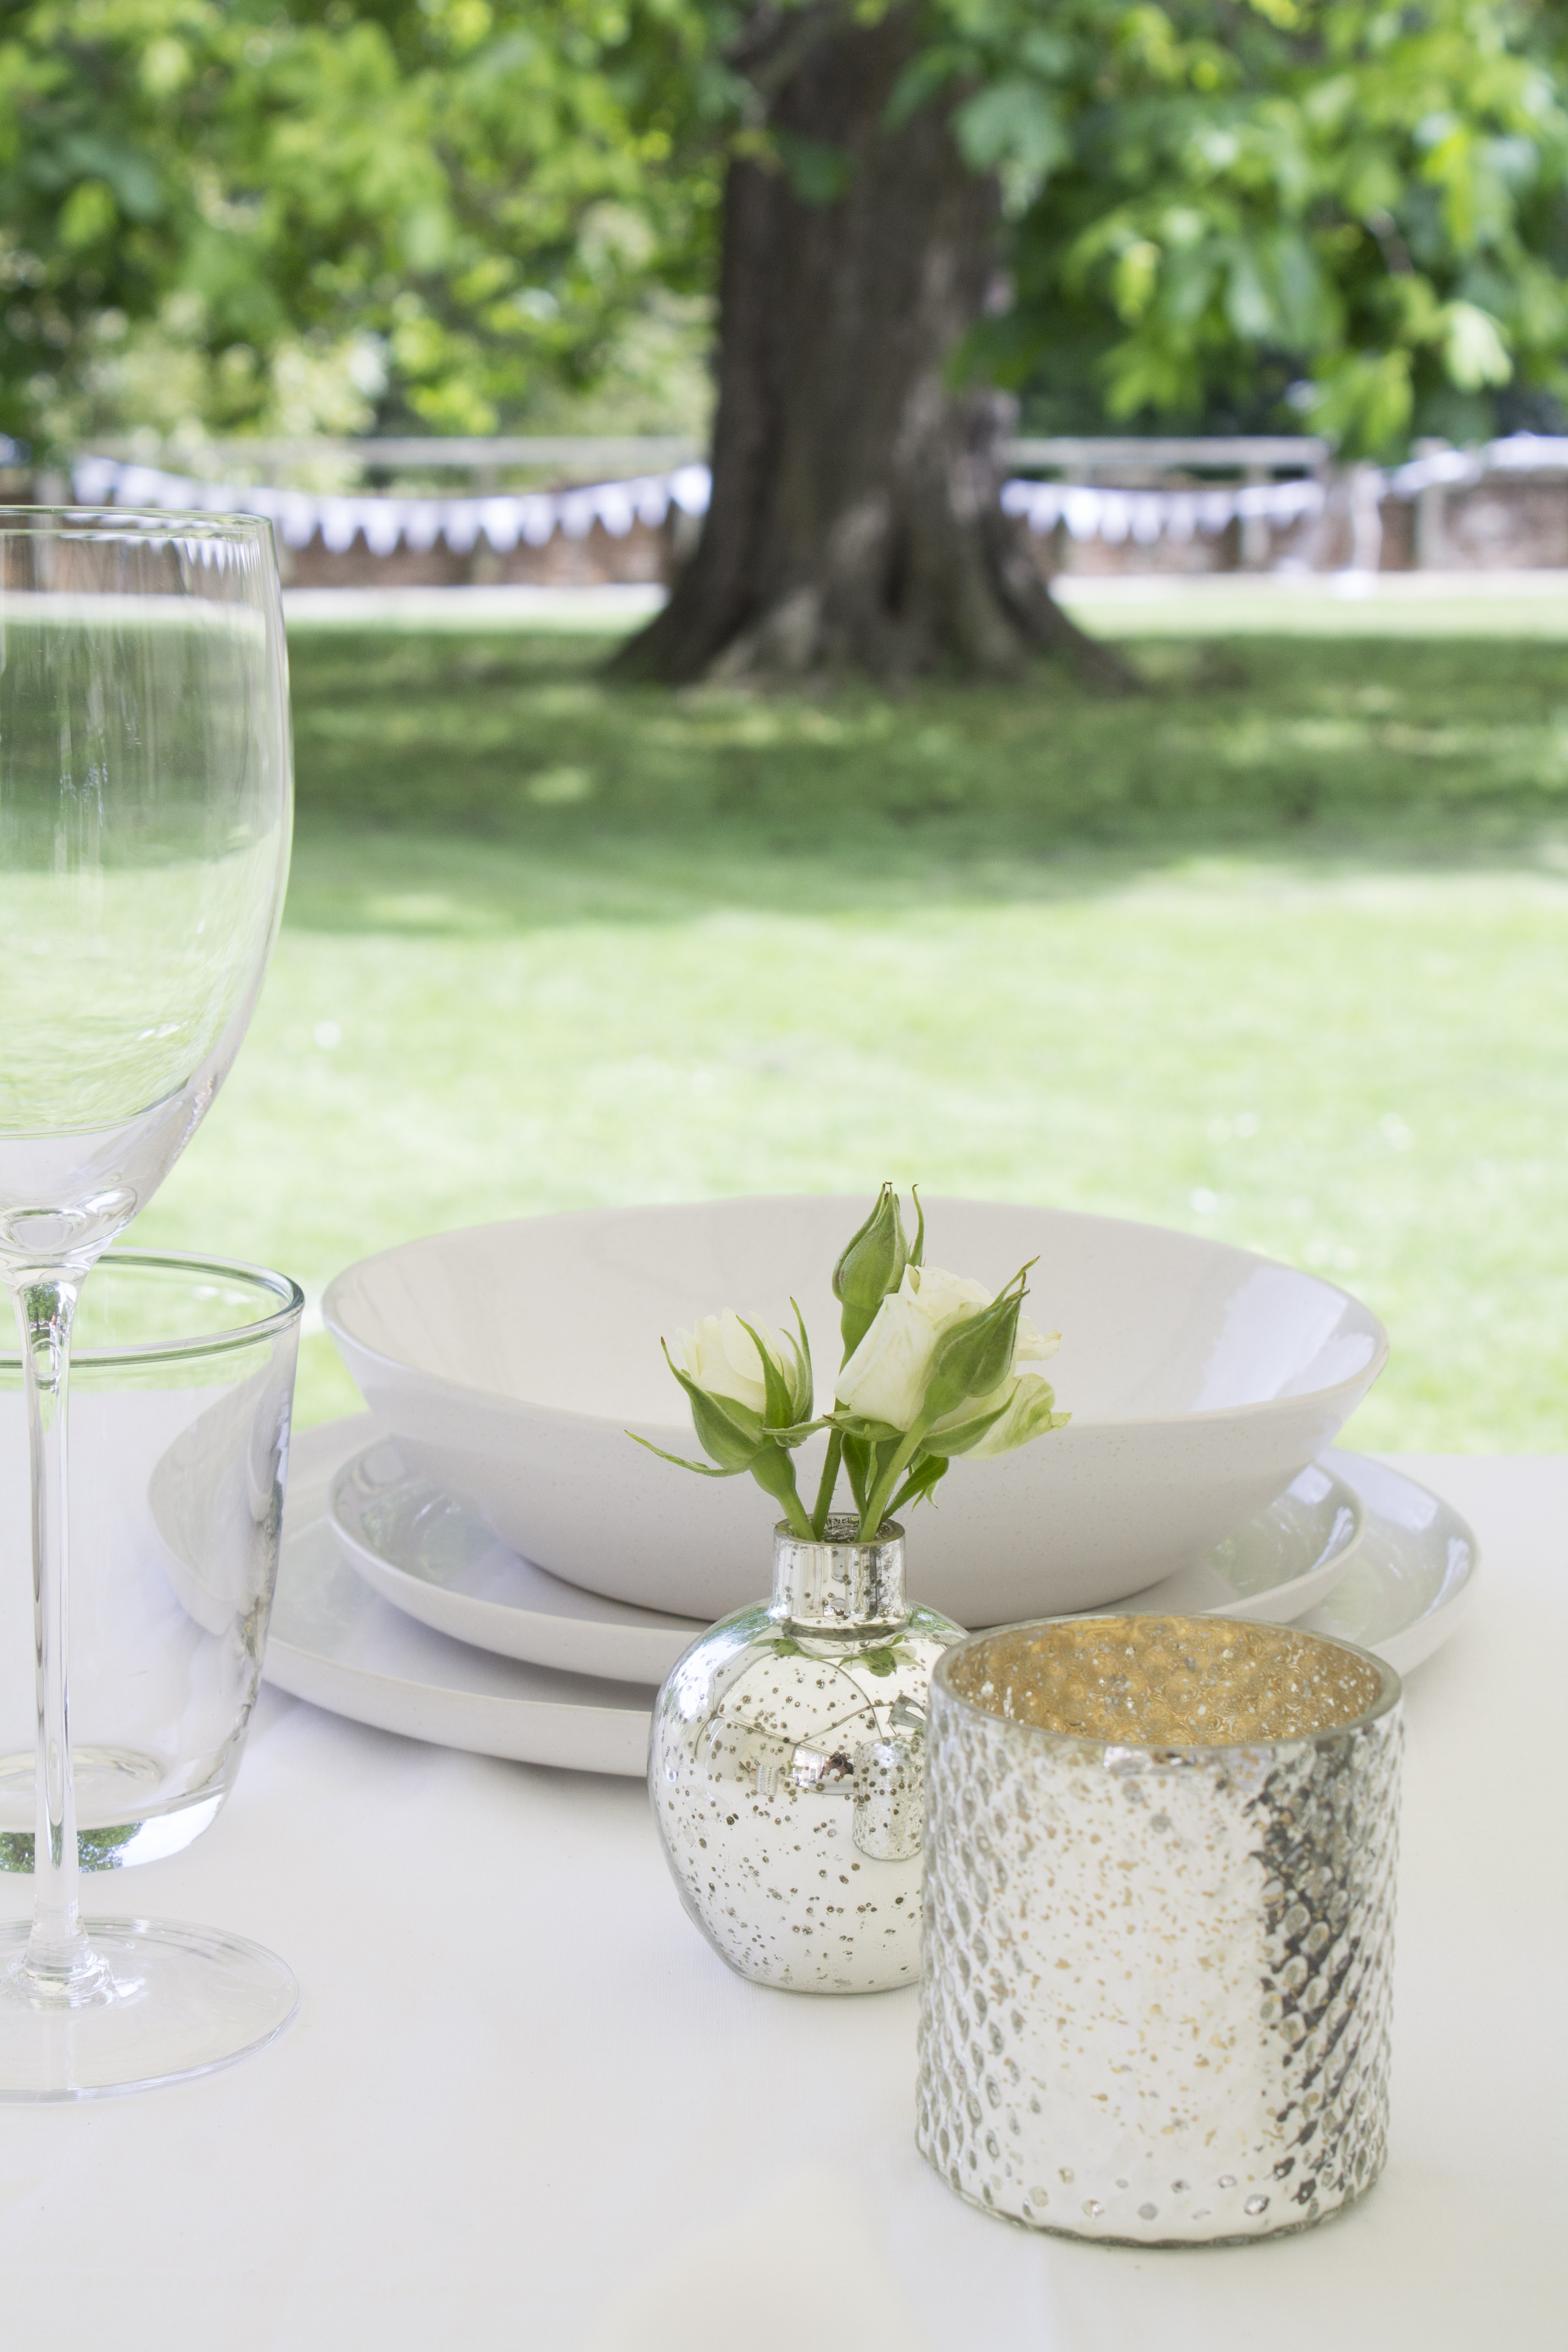 Summer-table-place-setting-for-Summer-entertaining-with-The-White-Company-photo-by-Geraldine-Tan-Little-Big-Bell